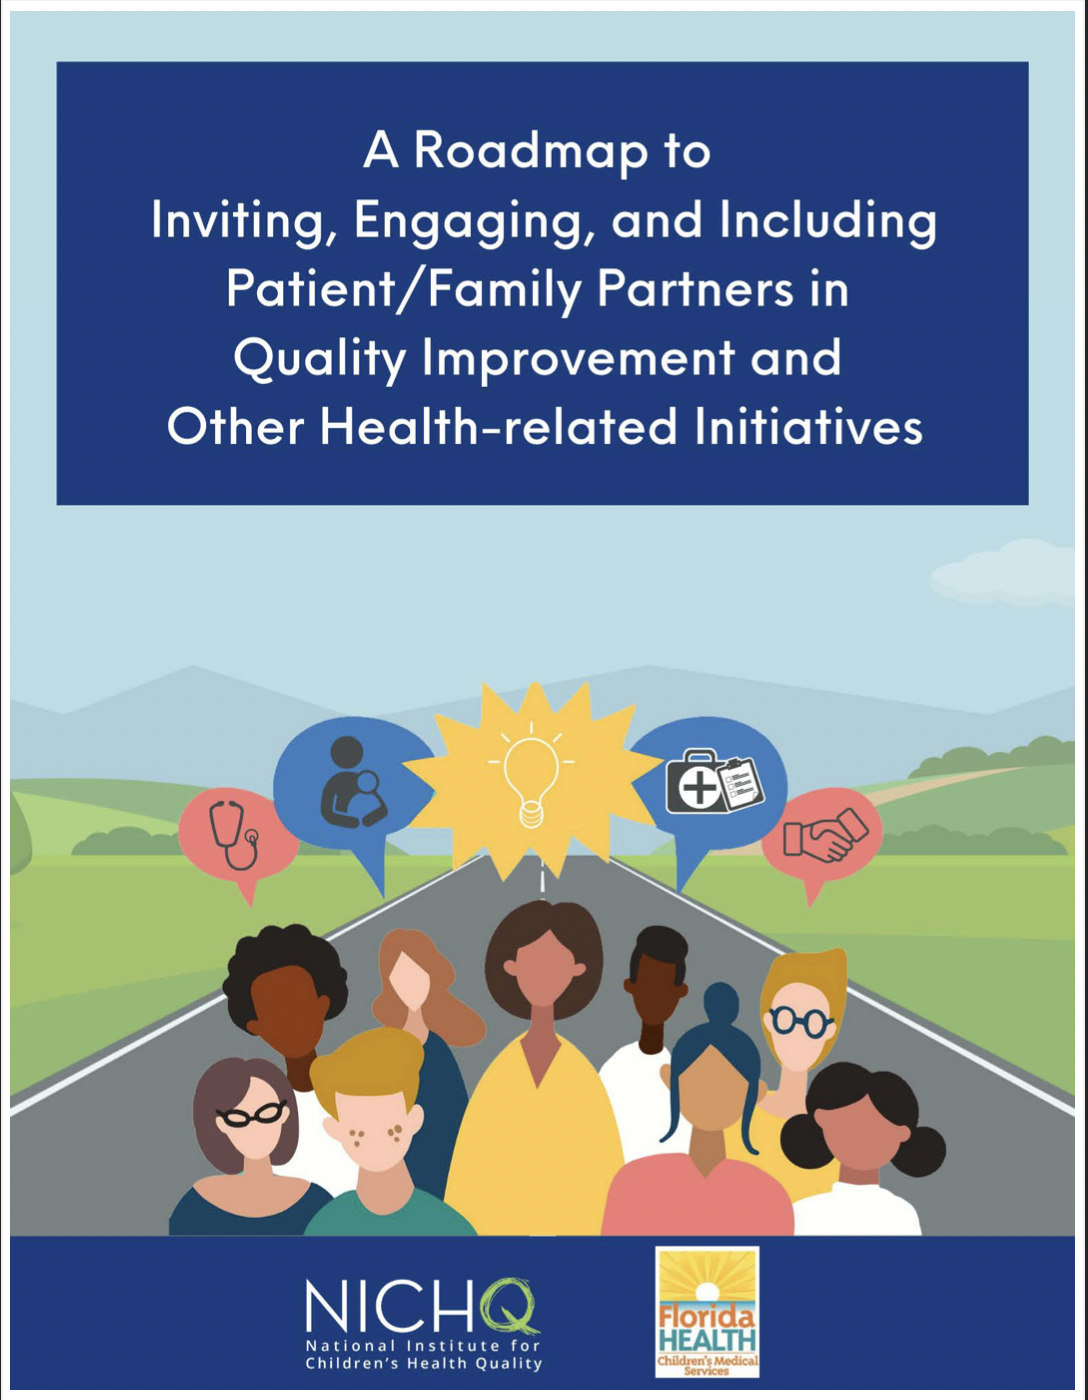 Roadmap to Inviting, Engaging, and Including Patient/Family Partners in Quality Improvement and Other Related Initiatives 